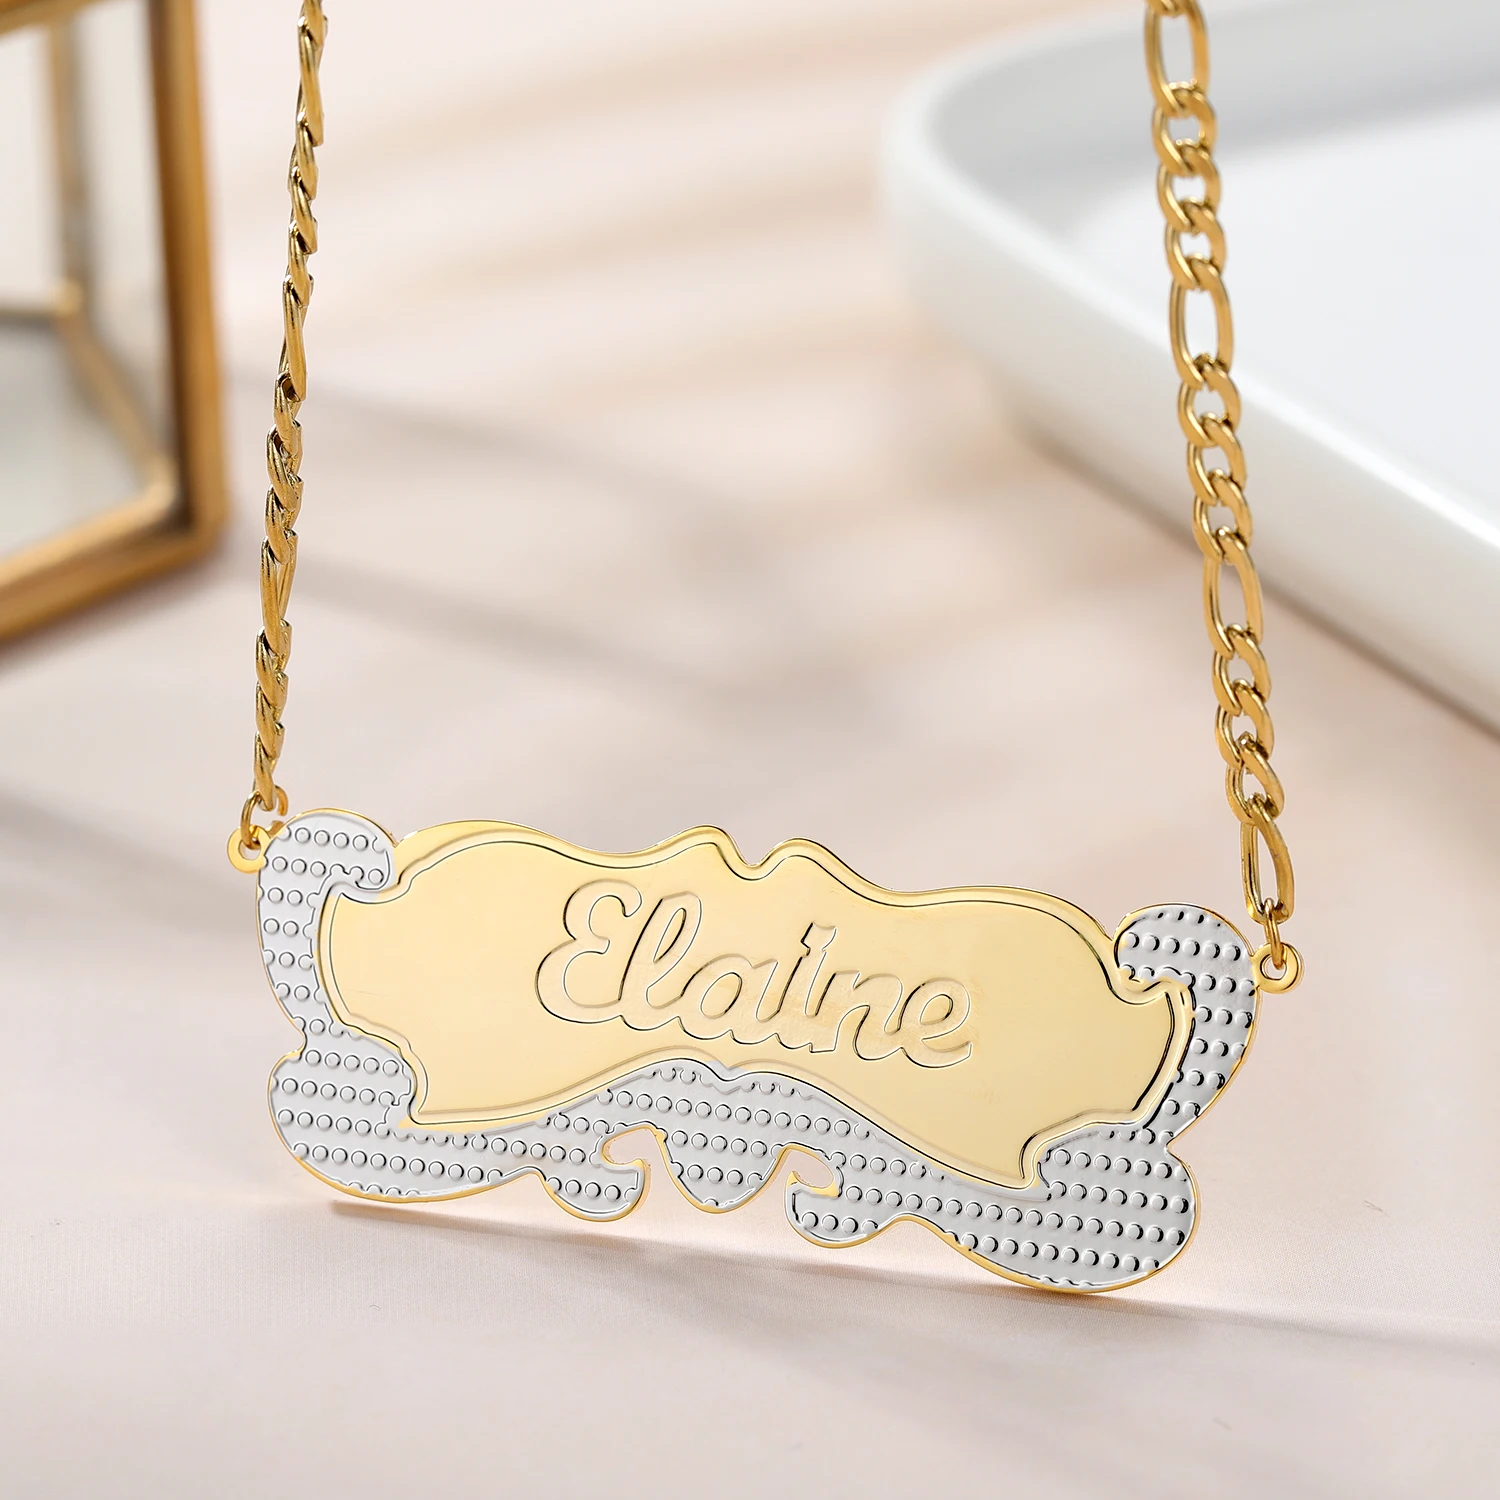 Double Gold Plated Name Necklace Laser Engraved Nameplate Pendant With Beading Stainless Steel Jewelry Gift For Women wavetopsign co2 laser si reflective mirror for laser engraver gold plated silicon reflector lenses dia 19 20 25 30 38 1 mm